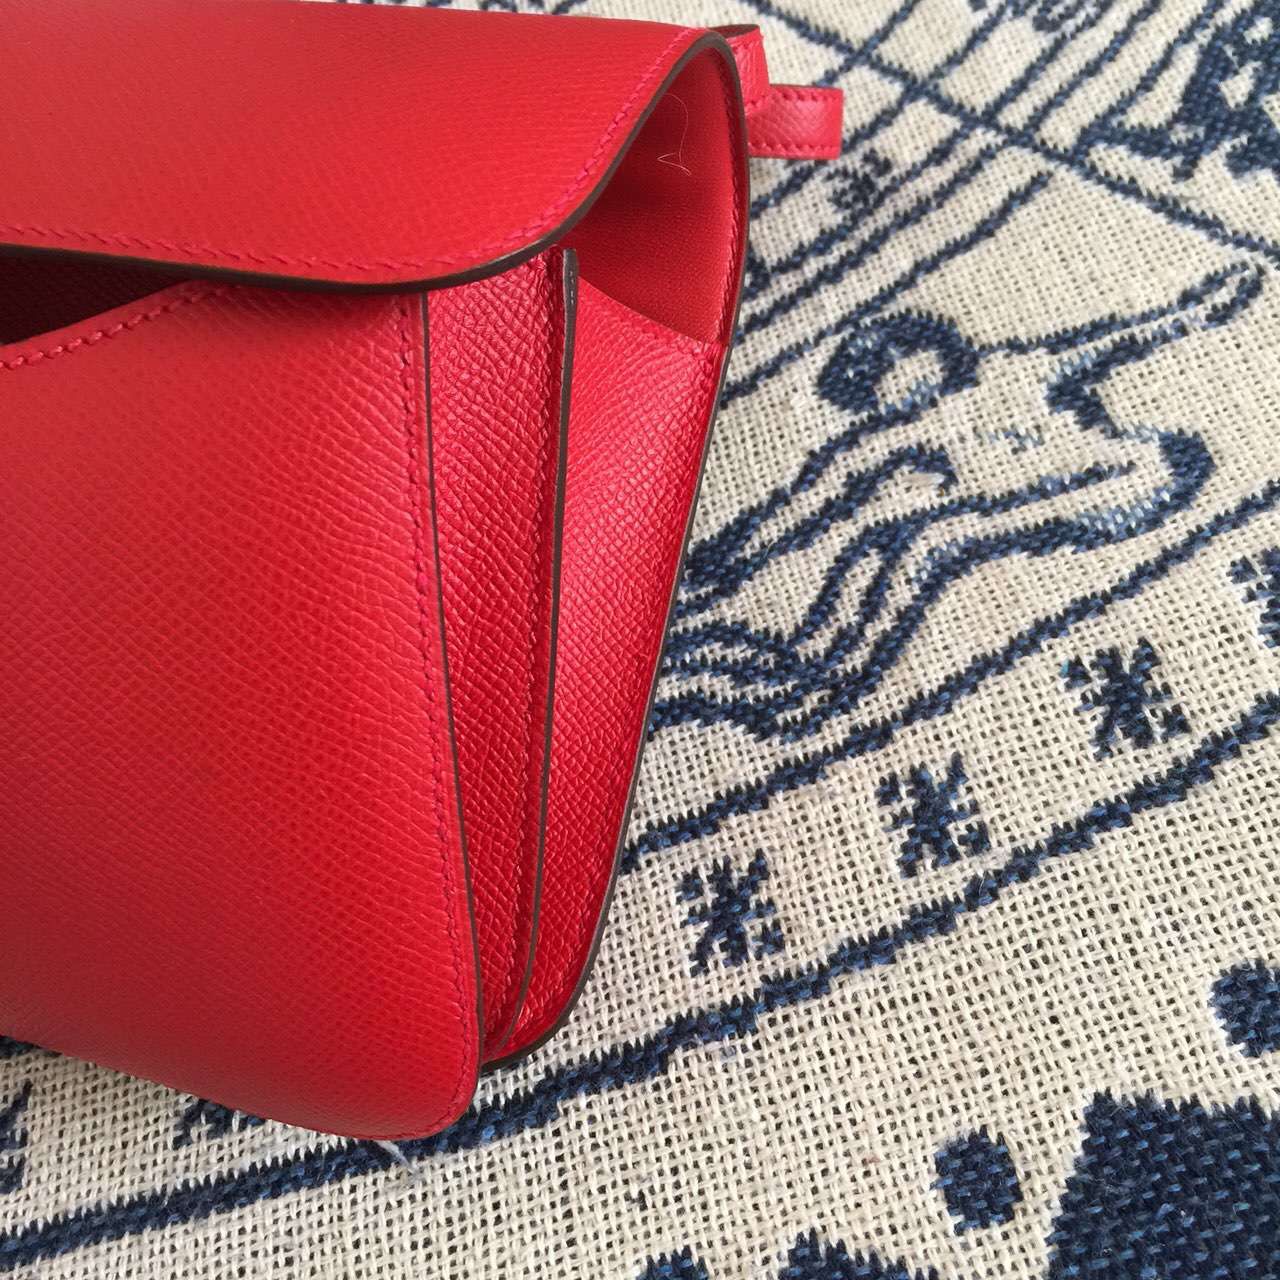 On Sale Hermes Constance Bag Epsom Calfskin Leather in Q5 Chinese Red 26CM